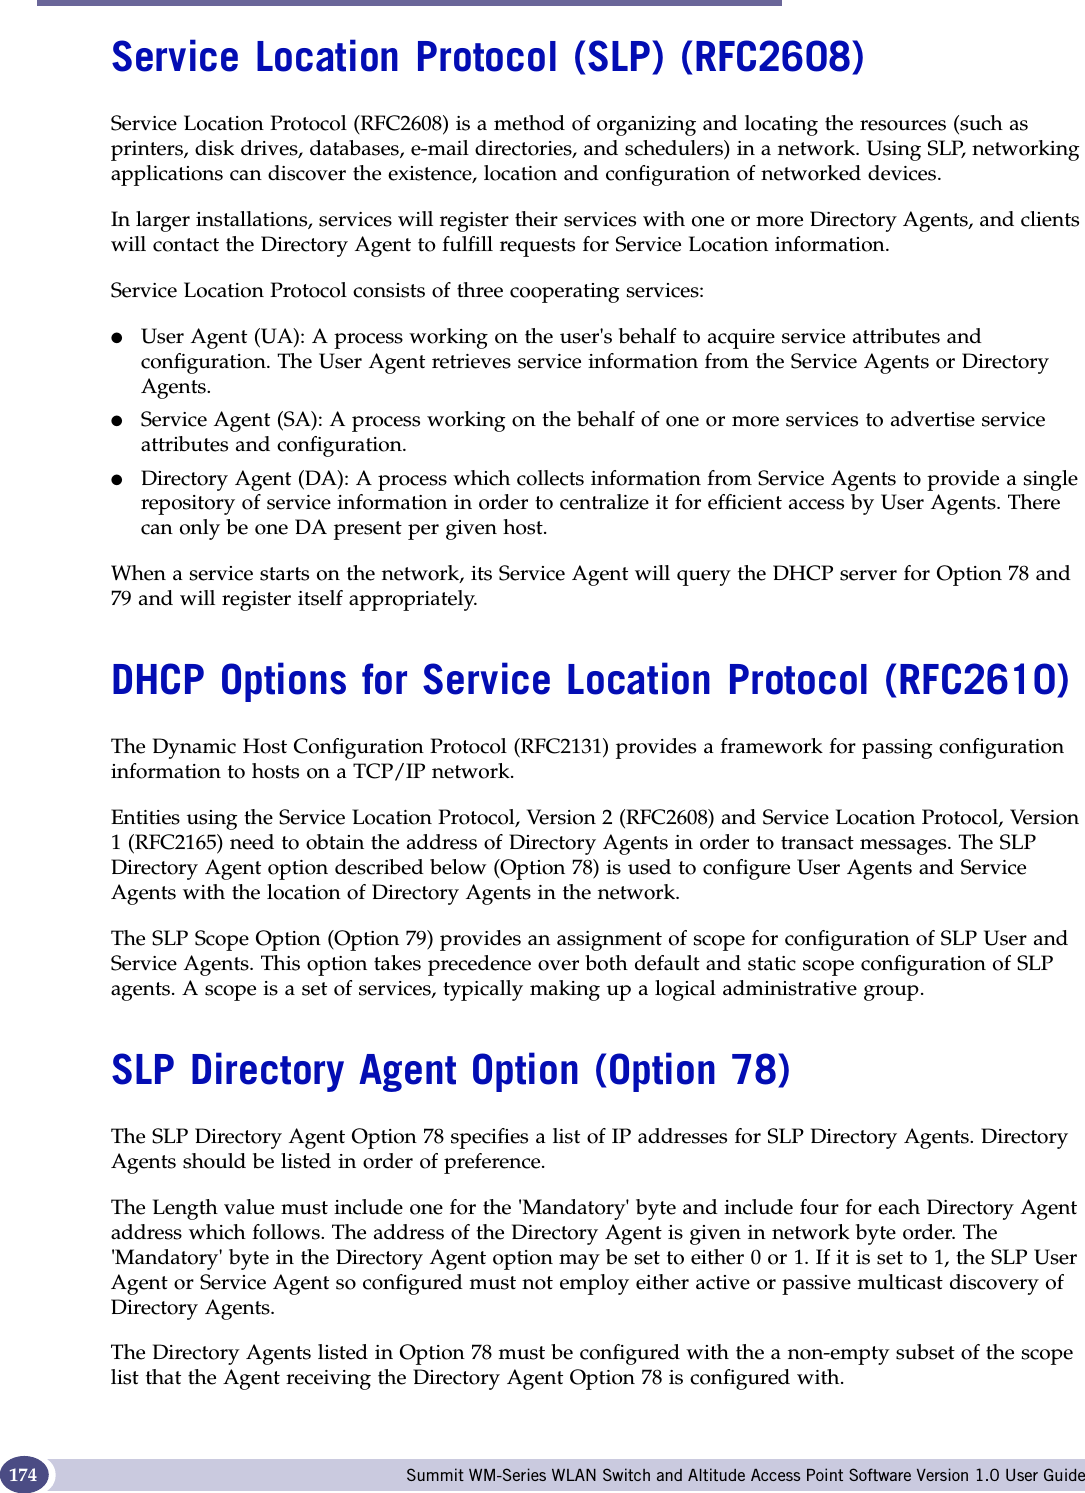 DHCP, SLP, and Option 78 reference Summit WM-Series WLAN Switch and Altitude Access Point Software Version 1.0 User Guide174Service Location Protocol (SLP) (RFC2608)Service Location Protocol (RFC2608) is a method of organizing and locating the resources (such as printers, disk drives, databases, e-mail directories, and schedulers) in a network. Using SLP, networking applications can discover the existence, location and configuration of networked devices.In larger installations, services will register their services with one or more Directory Agents, and clients will contact the Directory Agent to fulfill requests for Service Location information.Service Location Protocol consists of three cooperating services:●User Agent (UA): A process working on the user&apos;s behalf to acquire service attributes and configuration. The User Agent retrieves service information from the Service Agents or Directory Agents.●Service Agent (SA): A process working on the behalf of one or more services to advertise service attributes and configuration.●Directory Agent (DA): A process which collects information from Service Agents to provide a single repository of service information in order to centralize it for efficient access by User Agents. There can only be one DA present per given host.When a service starts on the network, its Service Agent will query the DHCP server for Option 78 and 79 and will register itself appropriately.DHCP Options for Service Location Protocol (RFC2610)The Dynamic Host Configuration Protocol (RFC2131) provides a framework for passing configuration information to hosts on a TCP/IP network. Entities using the Service Location Protocol, Version 2 (RFC2608) and Service Location Protocol, Version 1 (RFC2165) need to obtain the address of Directory Agents in order to transact messages. The SLP Directory Agent option described below (Option 78) is used to configure User Agents and Service Agents with the location of Directory Agents in the network.The SLP Scope Option (Option 79) provides an assignment of scope for configuration of SLP User and Service Agents. This option takes precedence over both default and static scope configuration of SLP agents. A scope is a set of services, typically making up a logical administrative group.SLP Directory Agent Option (Option 78)The SLP Directory Agent Option 78 specifies a list of IP addresses for SLP Directory Agents. Directory Agents should be listed in order of preference.The Length value must include one for the &apos;Mandatory&apos; byte and include four for each Directory Agent address which follows. The address of the Directory Agent is given in network byte order. The &apos;Mandatory&apos; byte in the Directory Agent option may be set to either 0 or 1. If it is set to 1, the SLP User Agent or Service Agent so configured must not employ either active or passive multicast discovery of Directory Agents.The Directory Agents listed in Option 78 must be configured with the a non-empty subset of the scope list that the Agent receiving the Directory Agent Option 78 is configured with. 